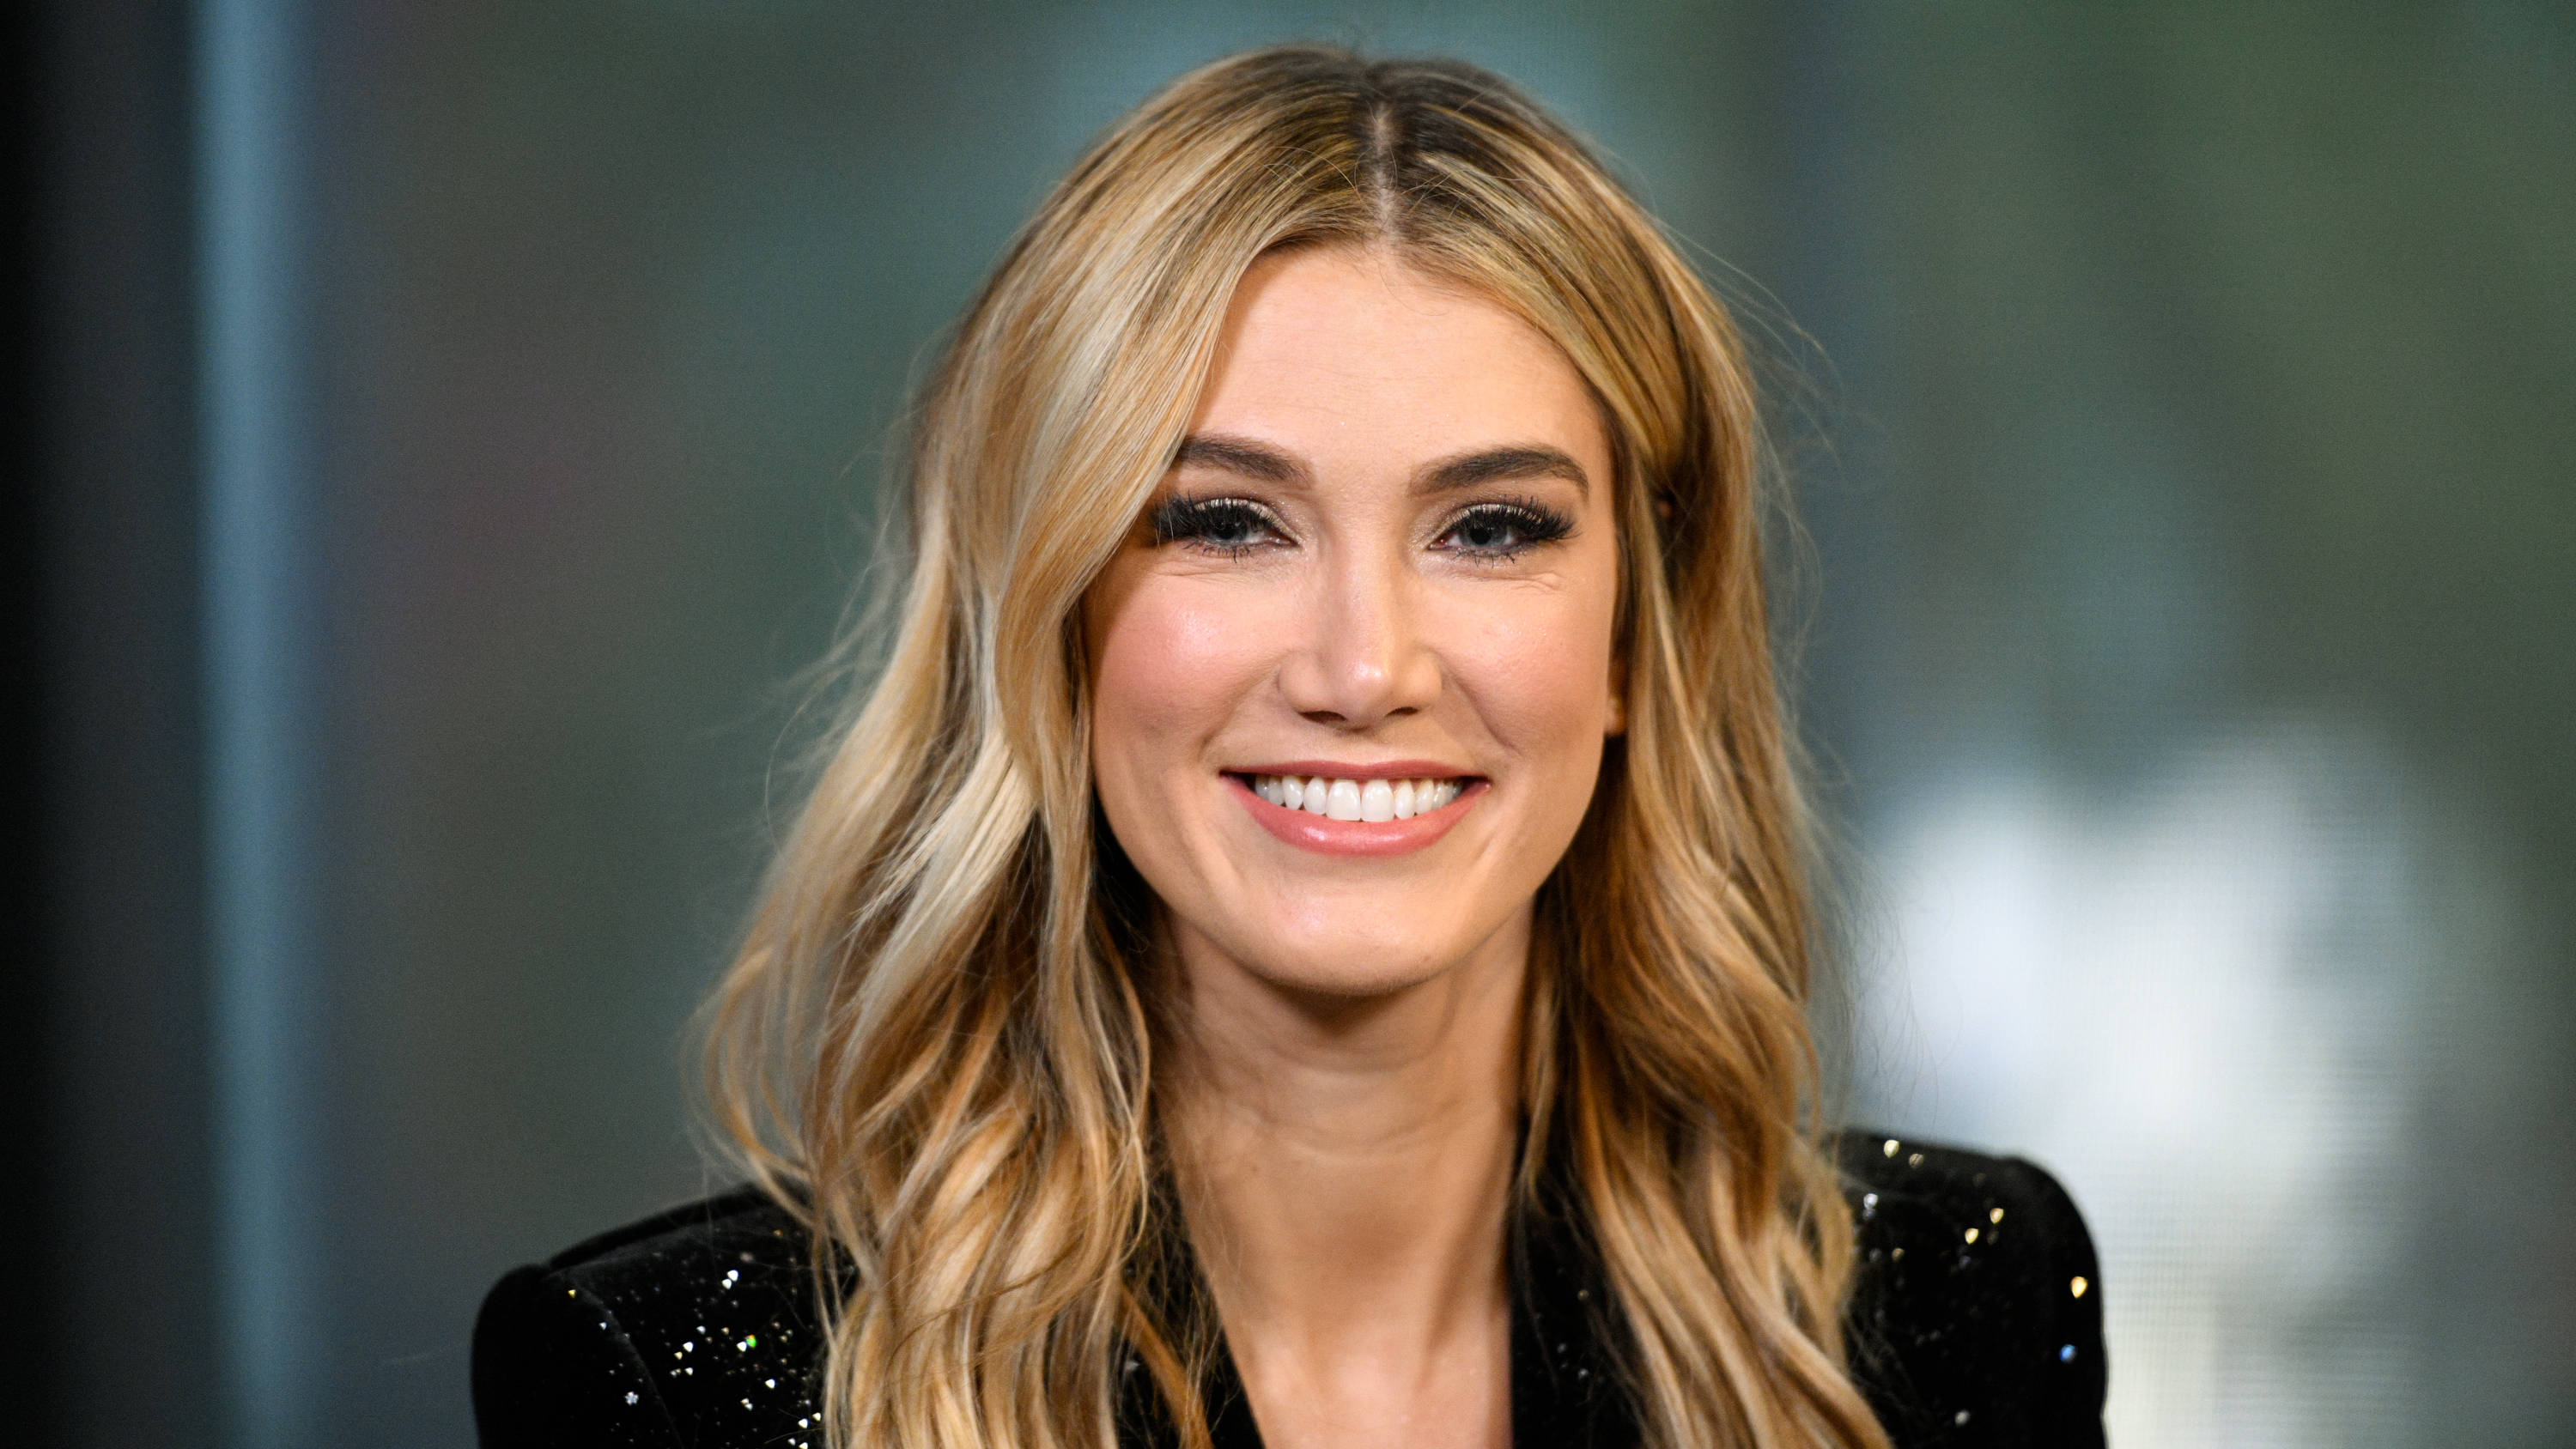 Delta Goodrem facts: Partner, songs, net worth, and more revealed